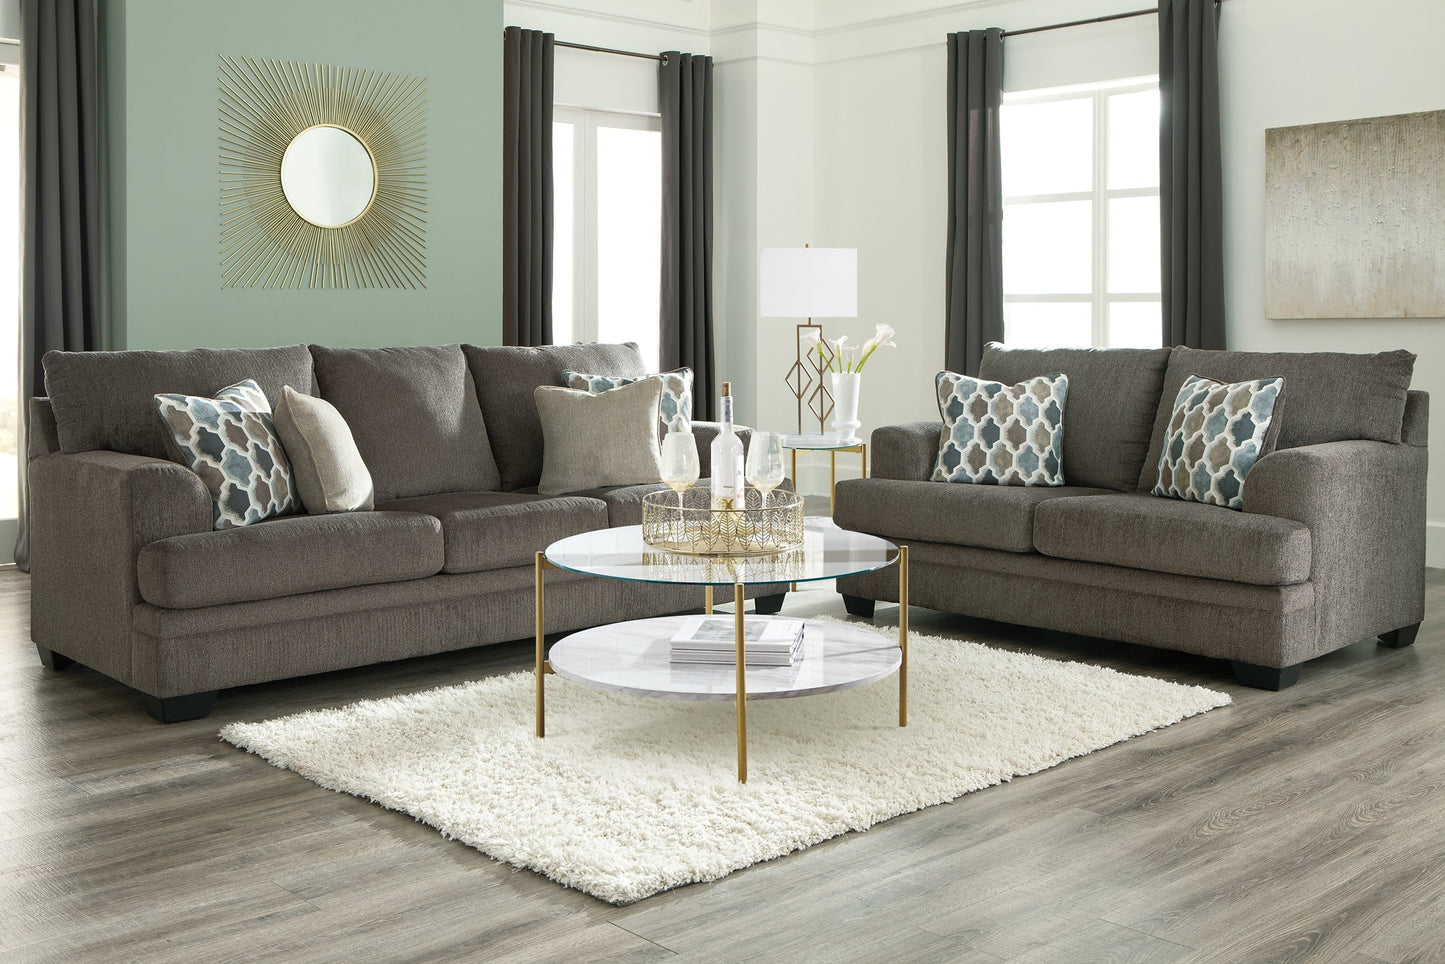 Wynora Coffee Table with 2 End Tables at Walker Mattress and Furniture Locations in Cedar Park and Belton TX.